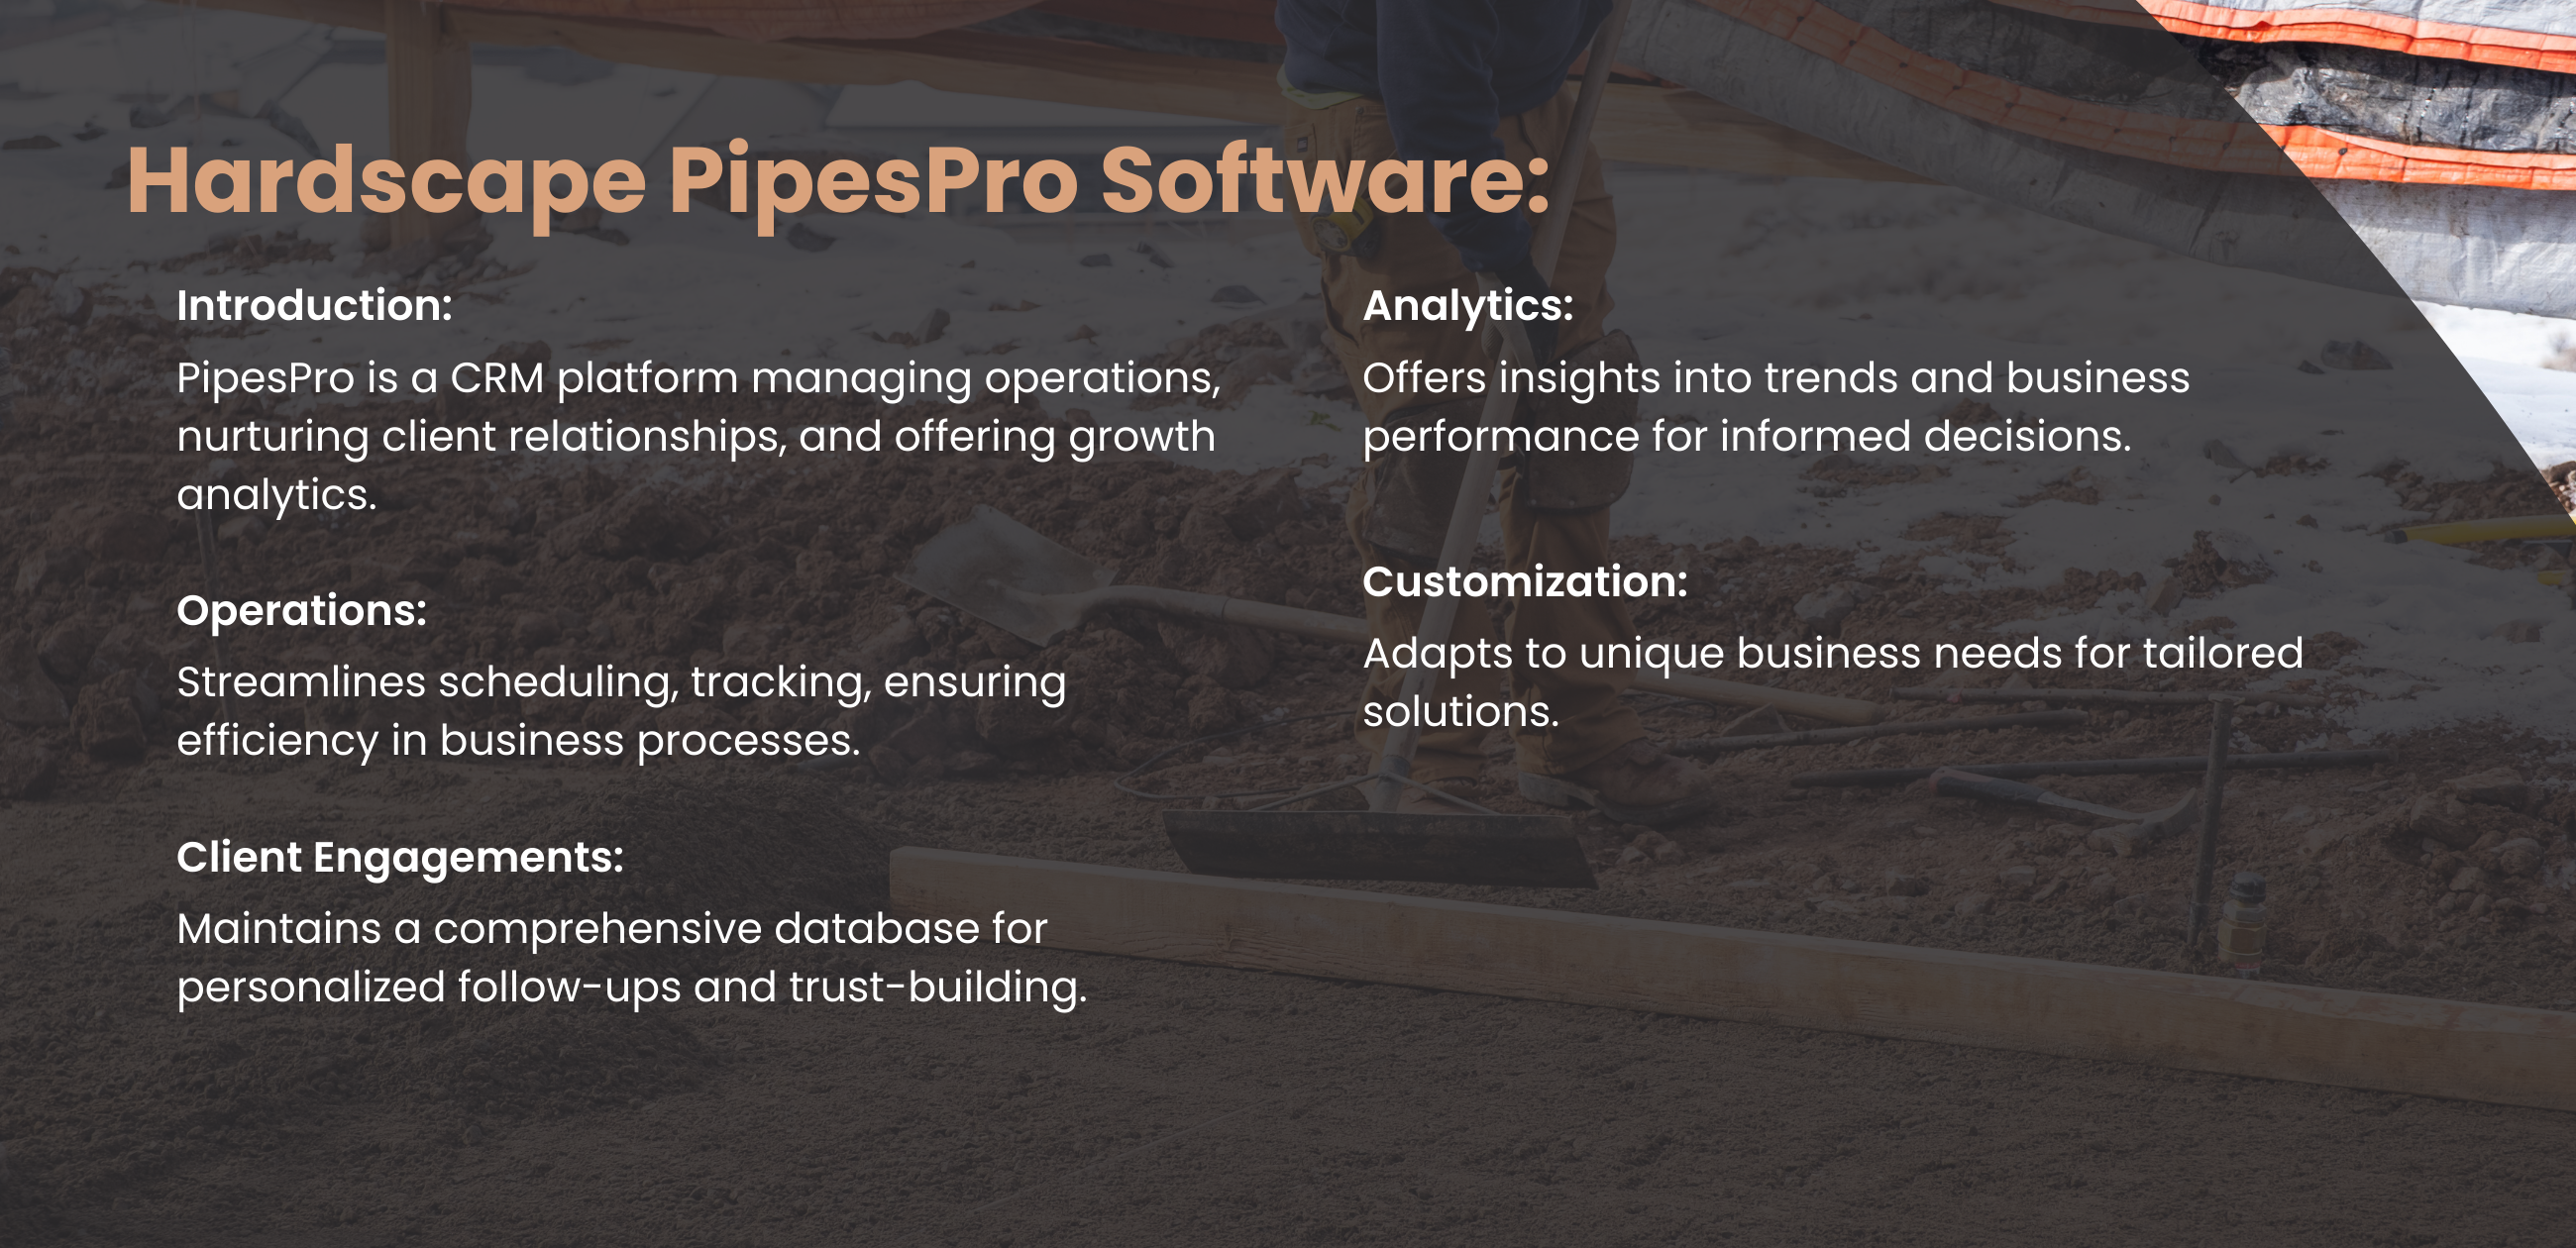 Hardscape PipesPro Software: Cultivating Client Relationships